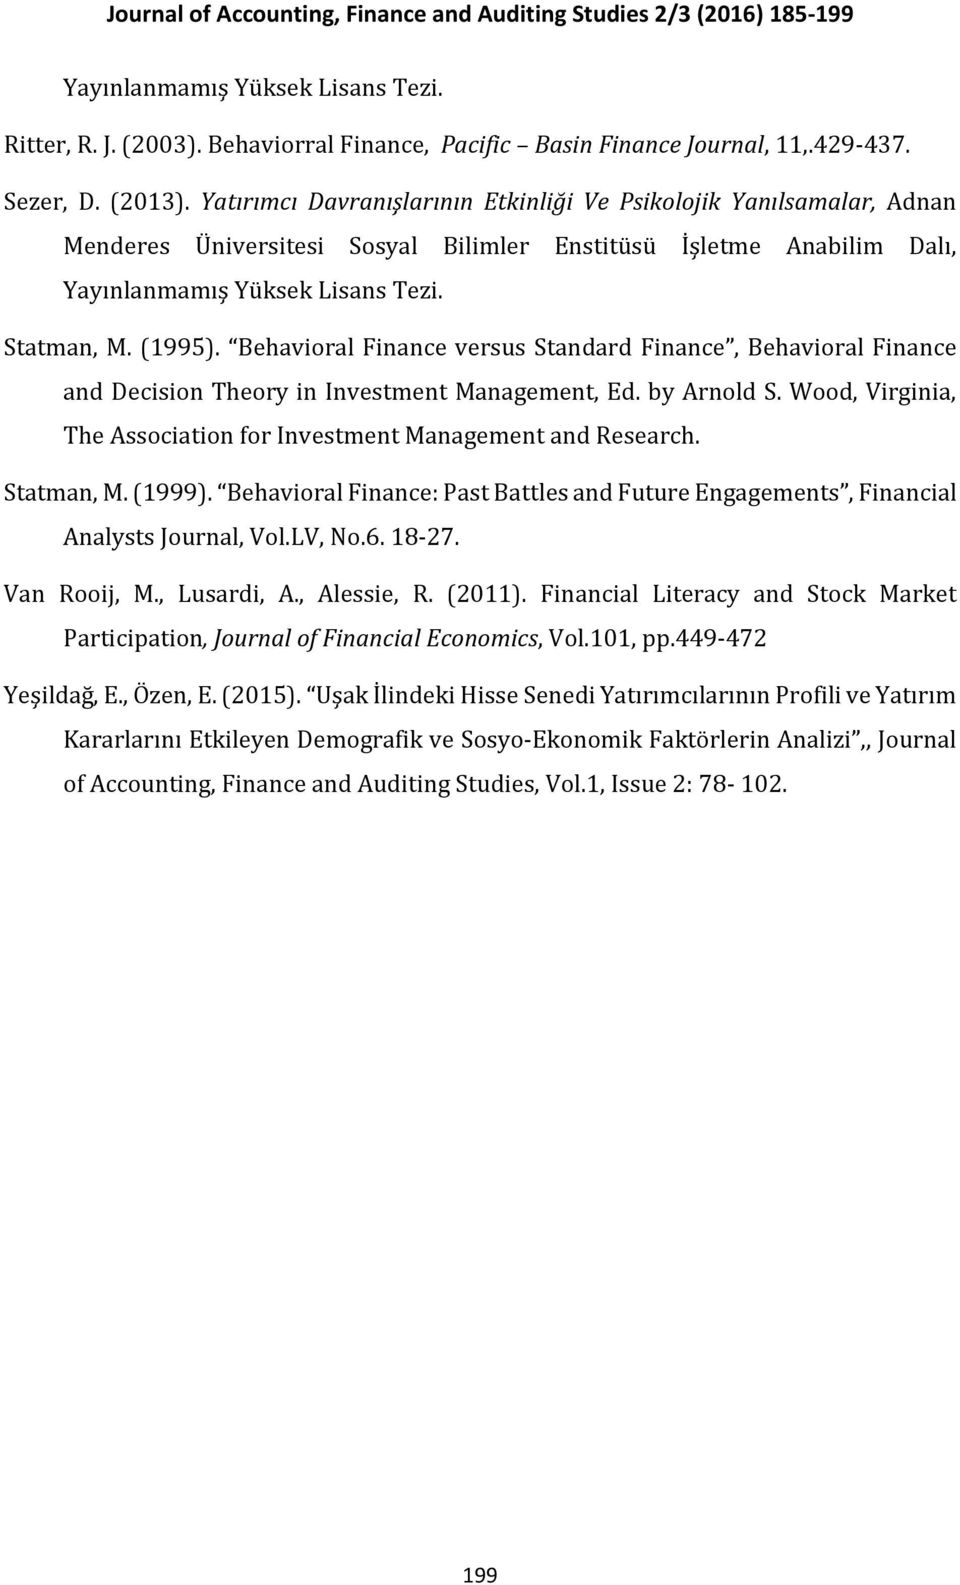 Behavioral Finance versus Standard Finance, Behavioral Finance and Decision Theory in Investment Management, Ed. by Arnold S. Wood, Virginia, The Association for Investment Management and Research.